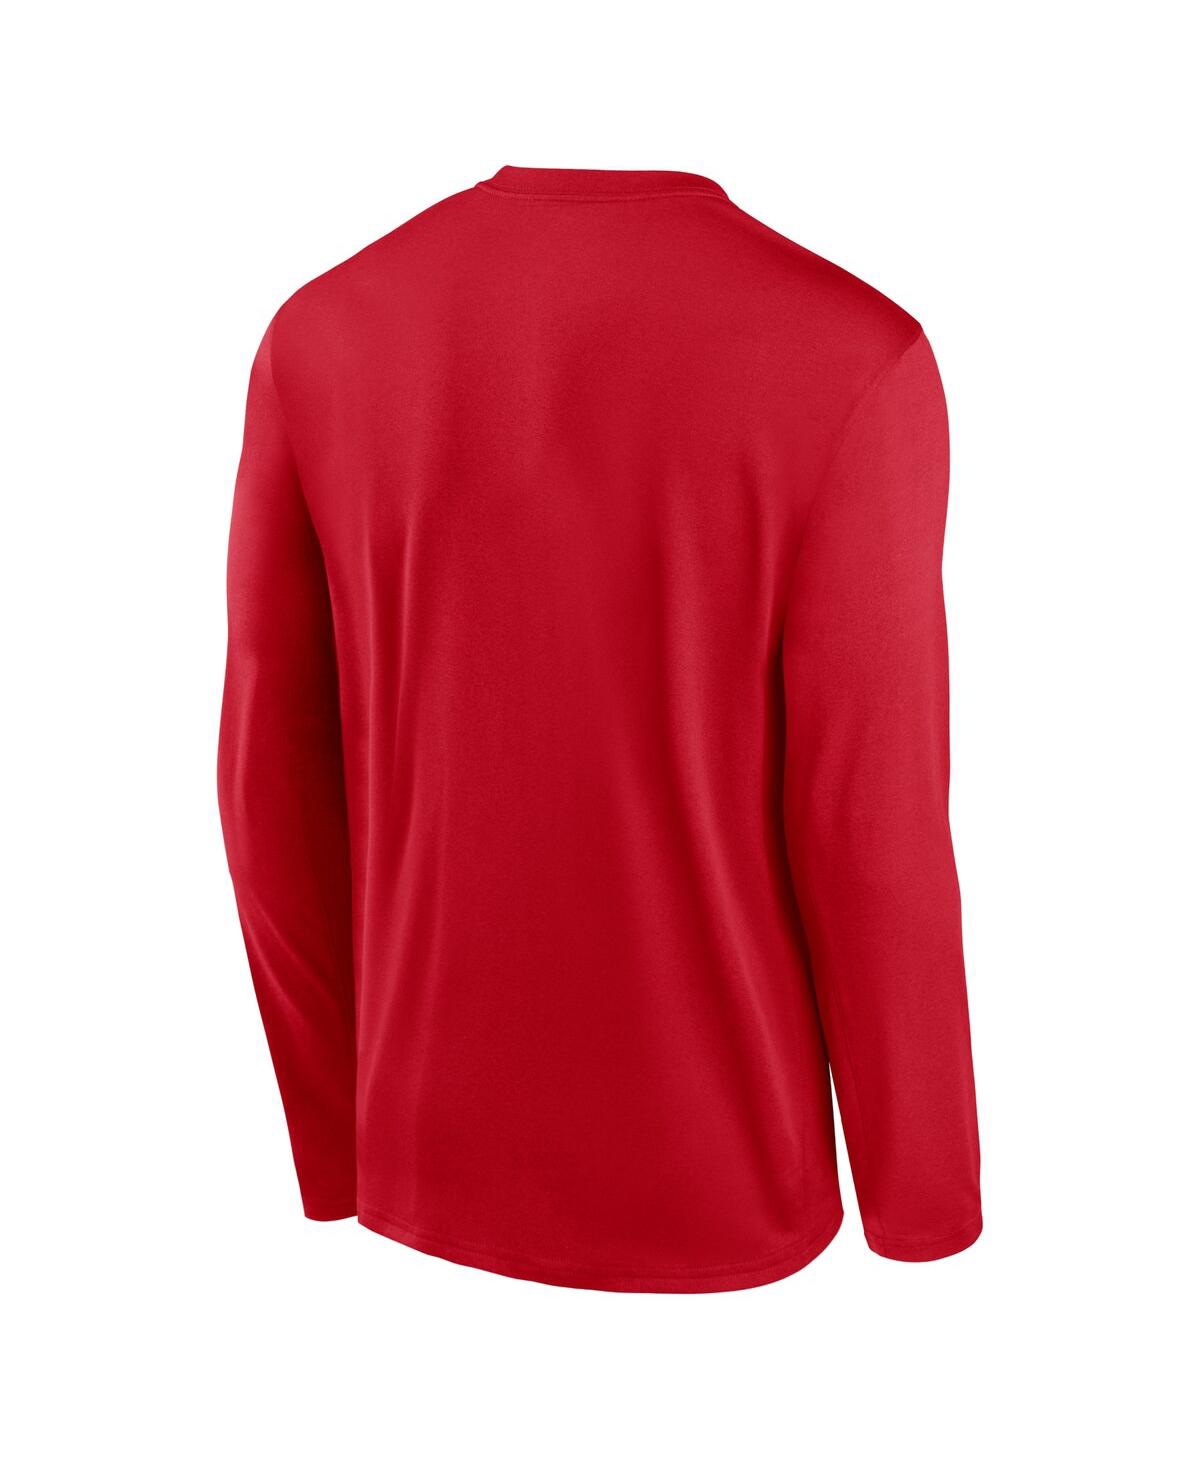 Shop Nike Men's Red Philadelphia Phillies Authentic Collection Practice Performance Long Sleeve T-shirt